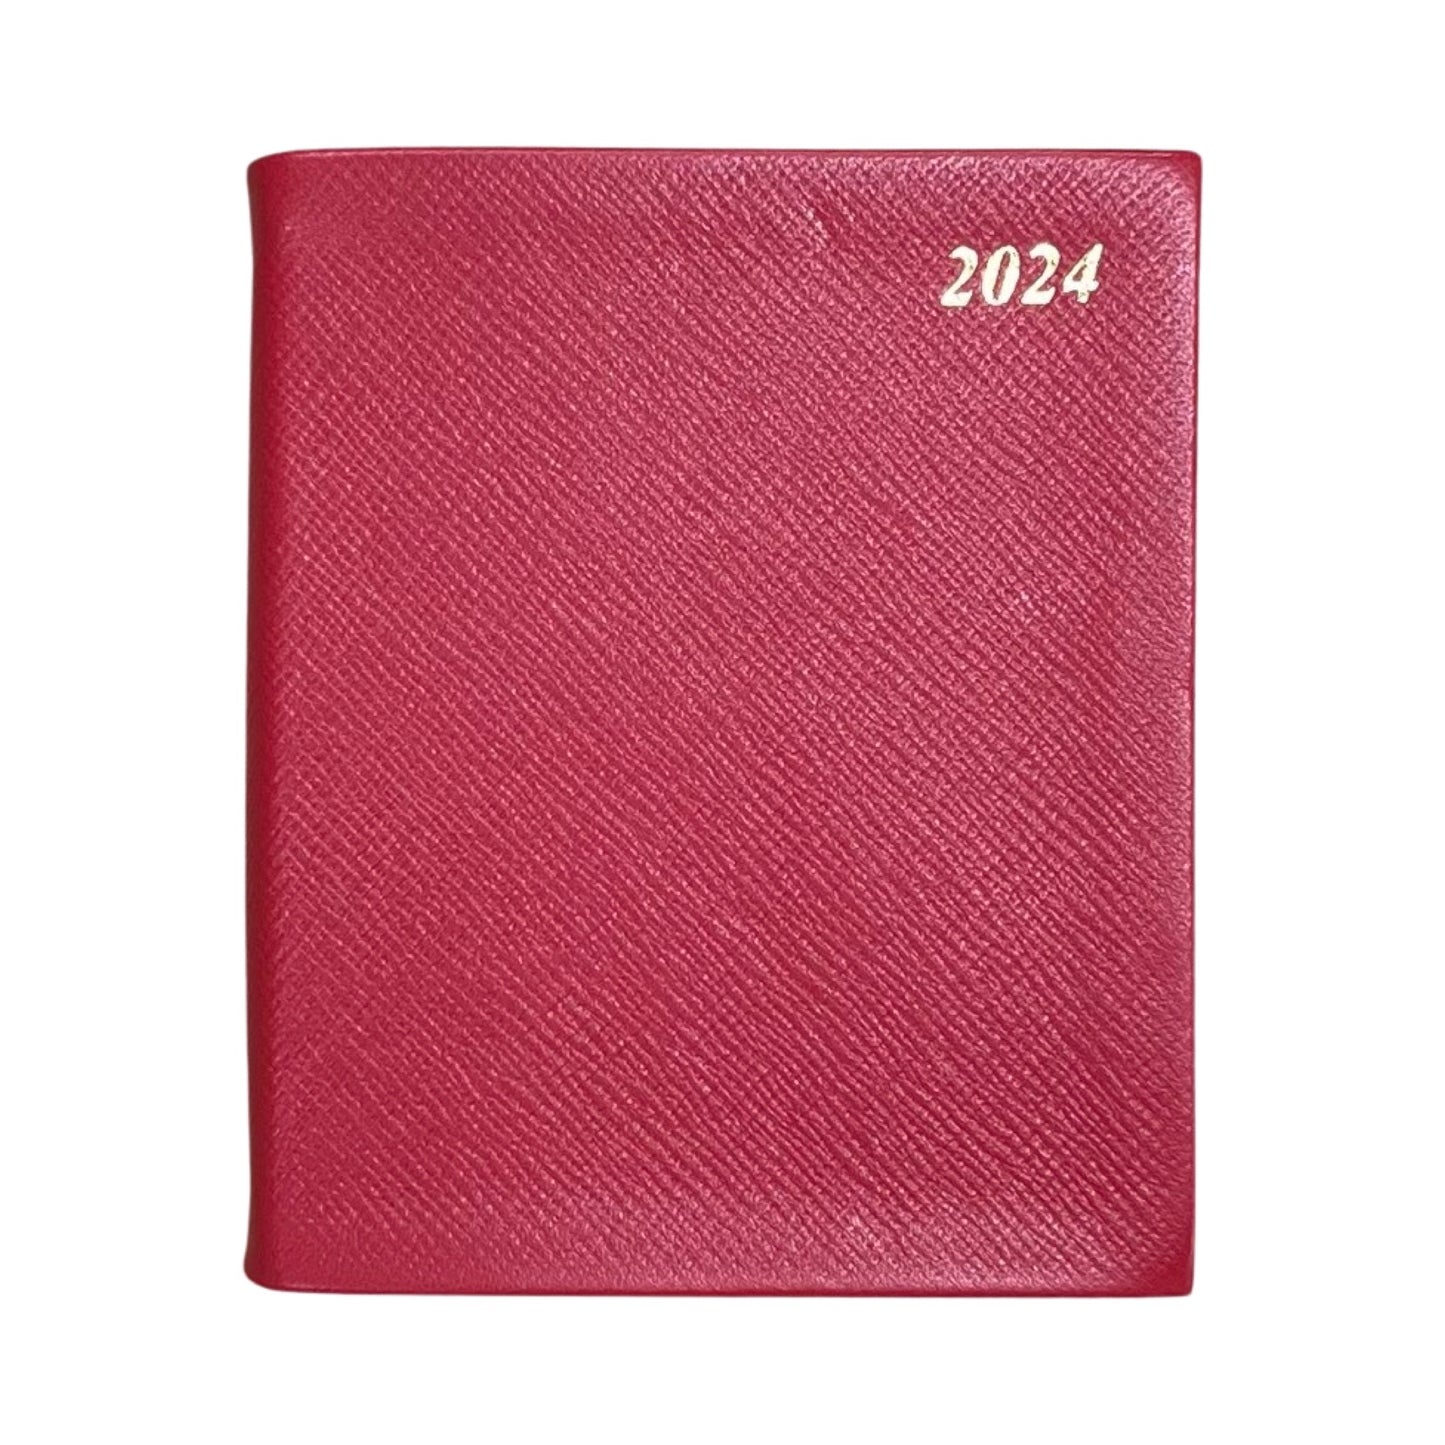 2024 CROSSGRAIN Leather Pocket Calendar Book | 4 x 2.5" | Thick, One Day Per Page | D142L